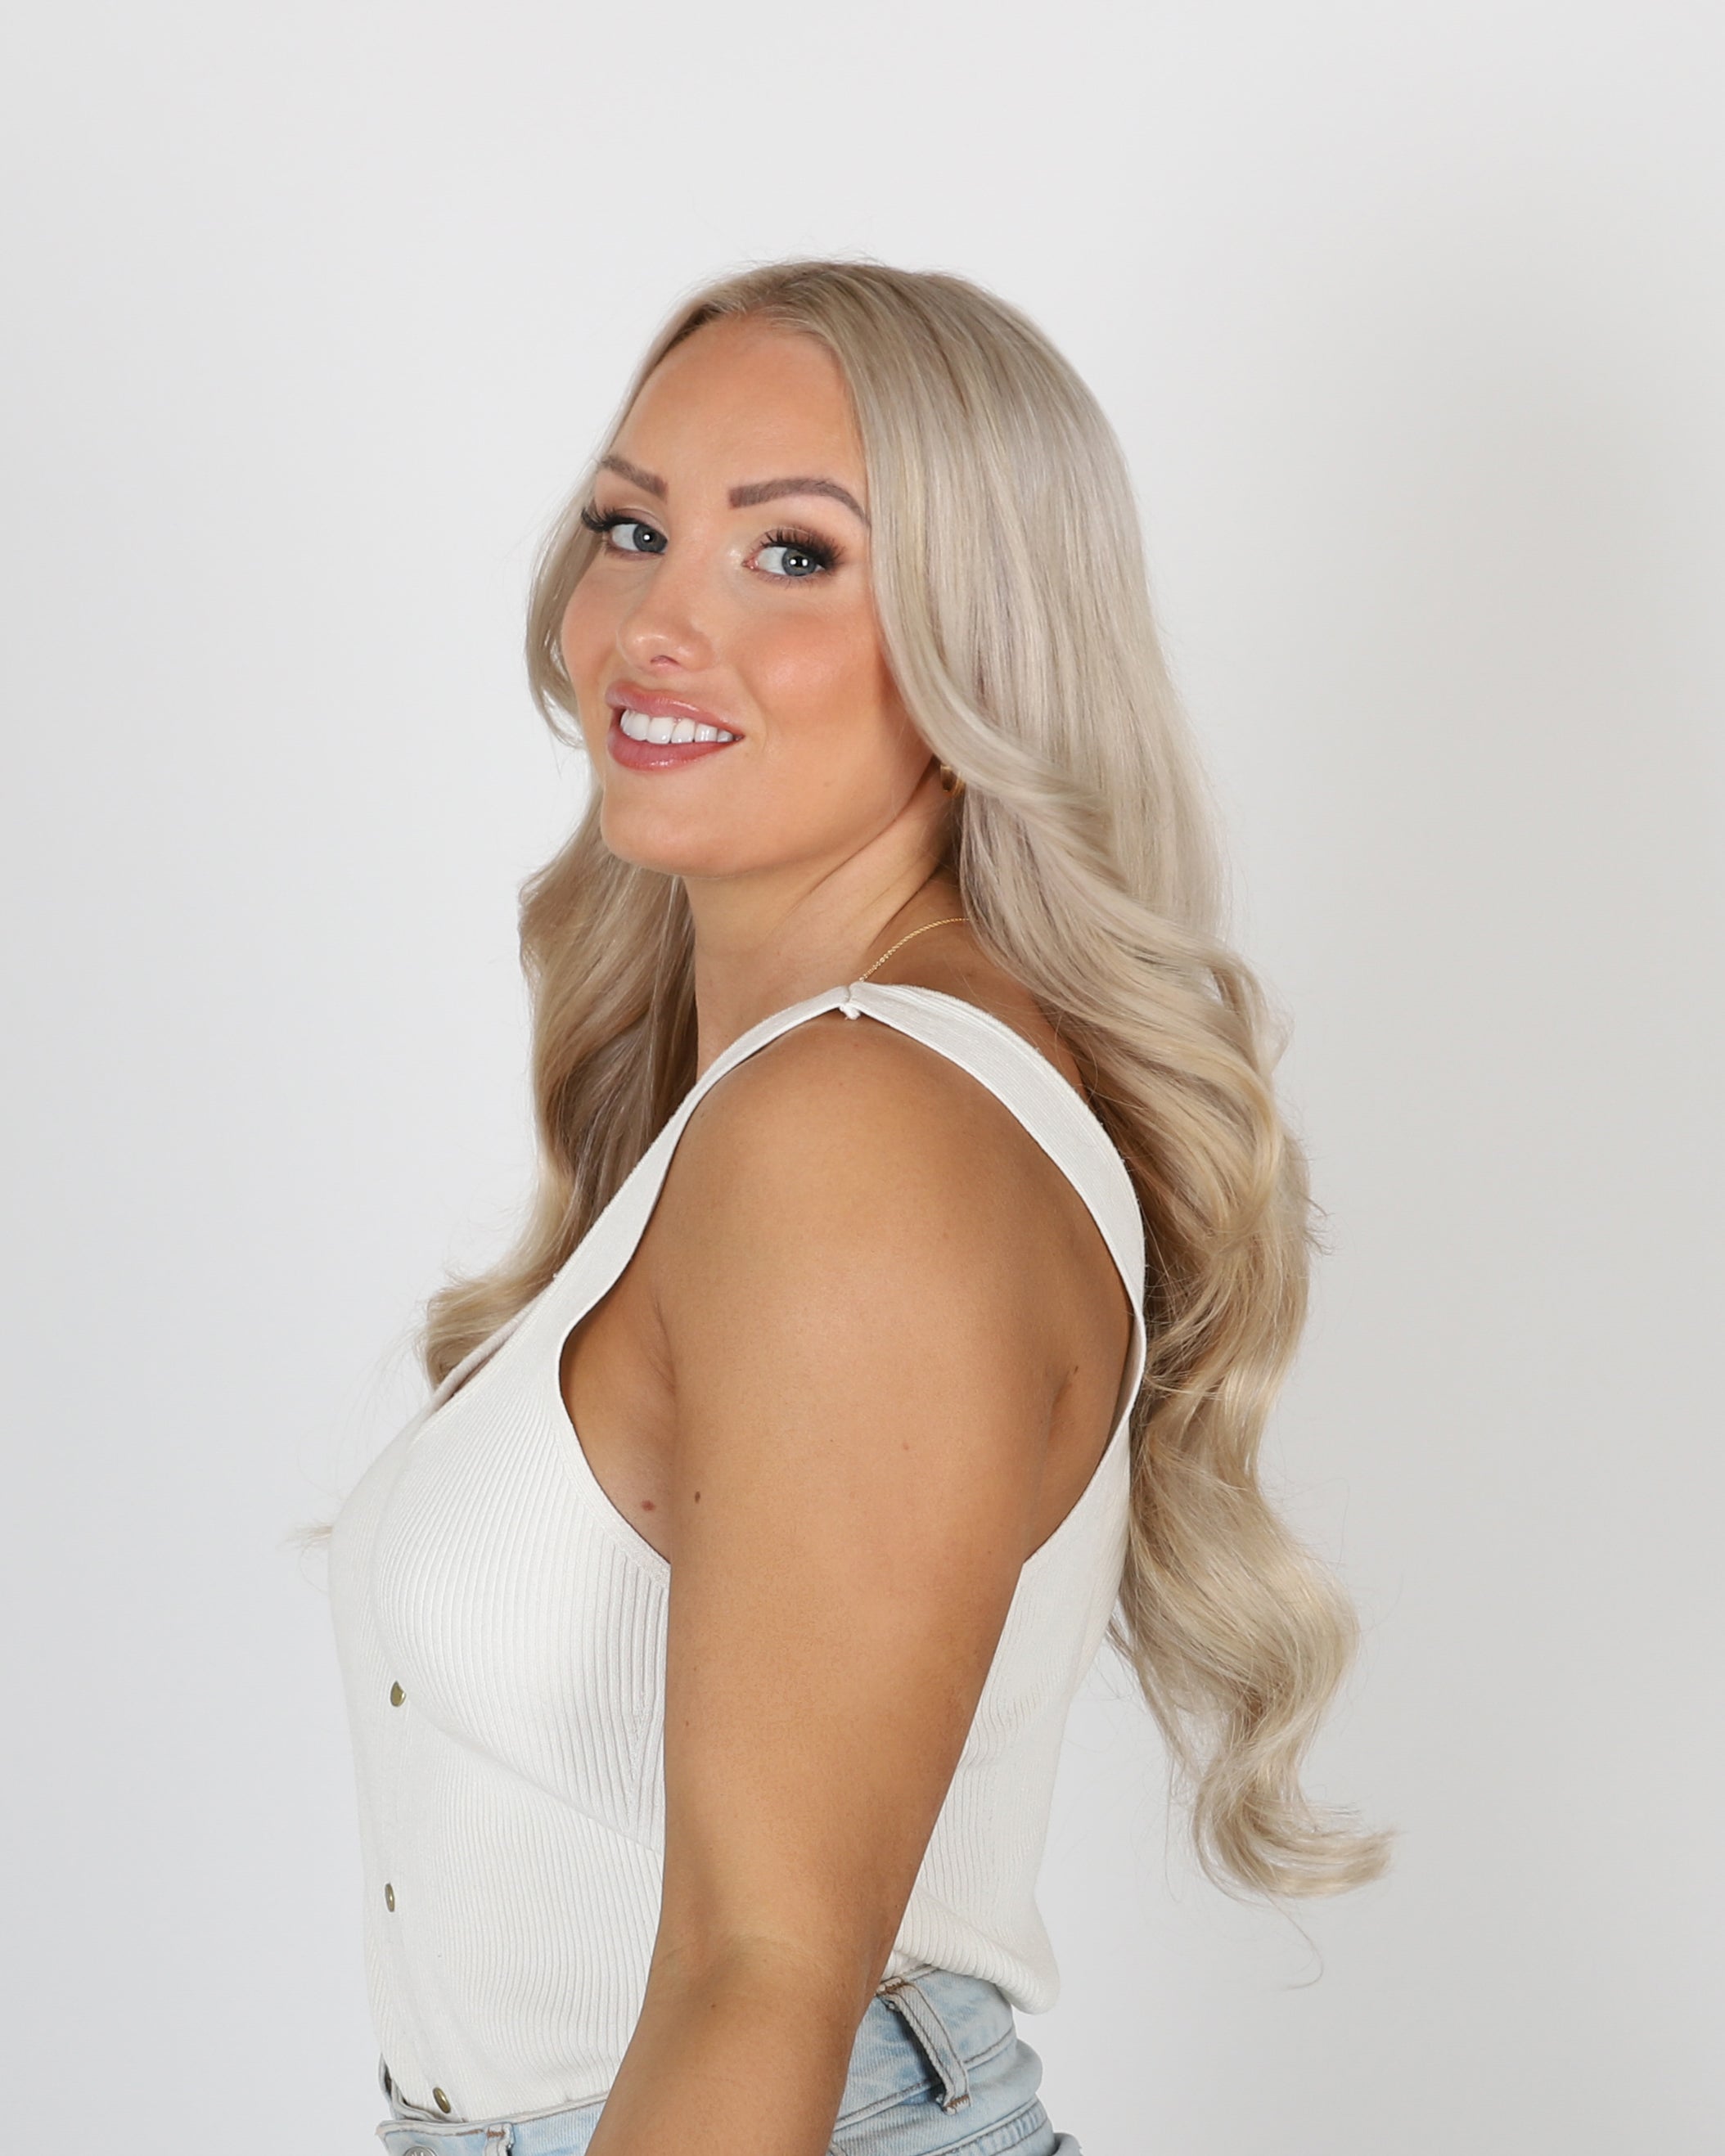 20" Seamless Clip-Ins (180g) - Pearl Blonde